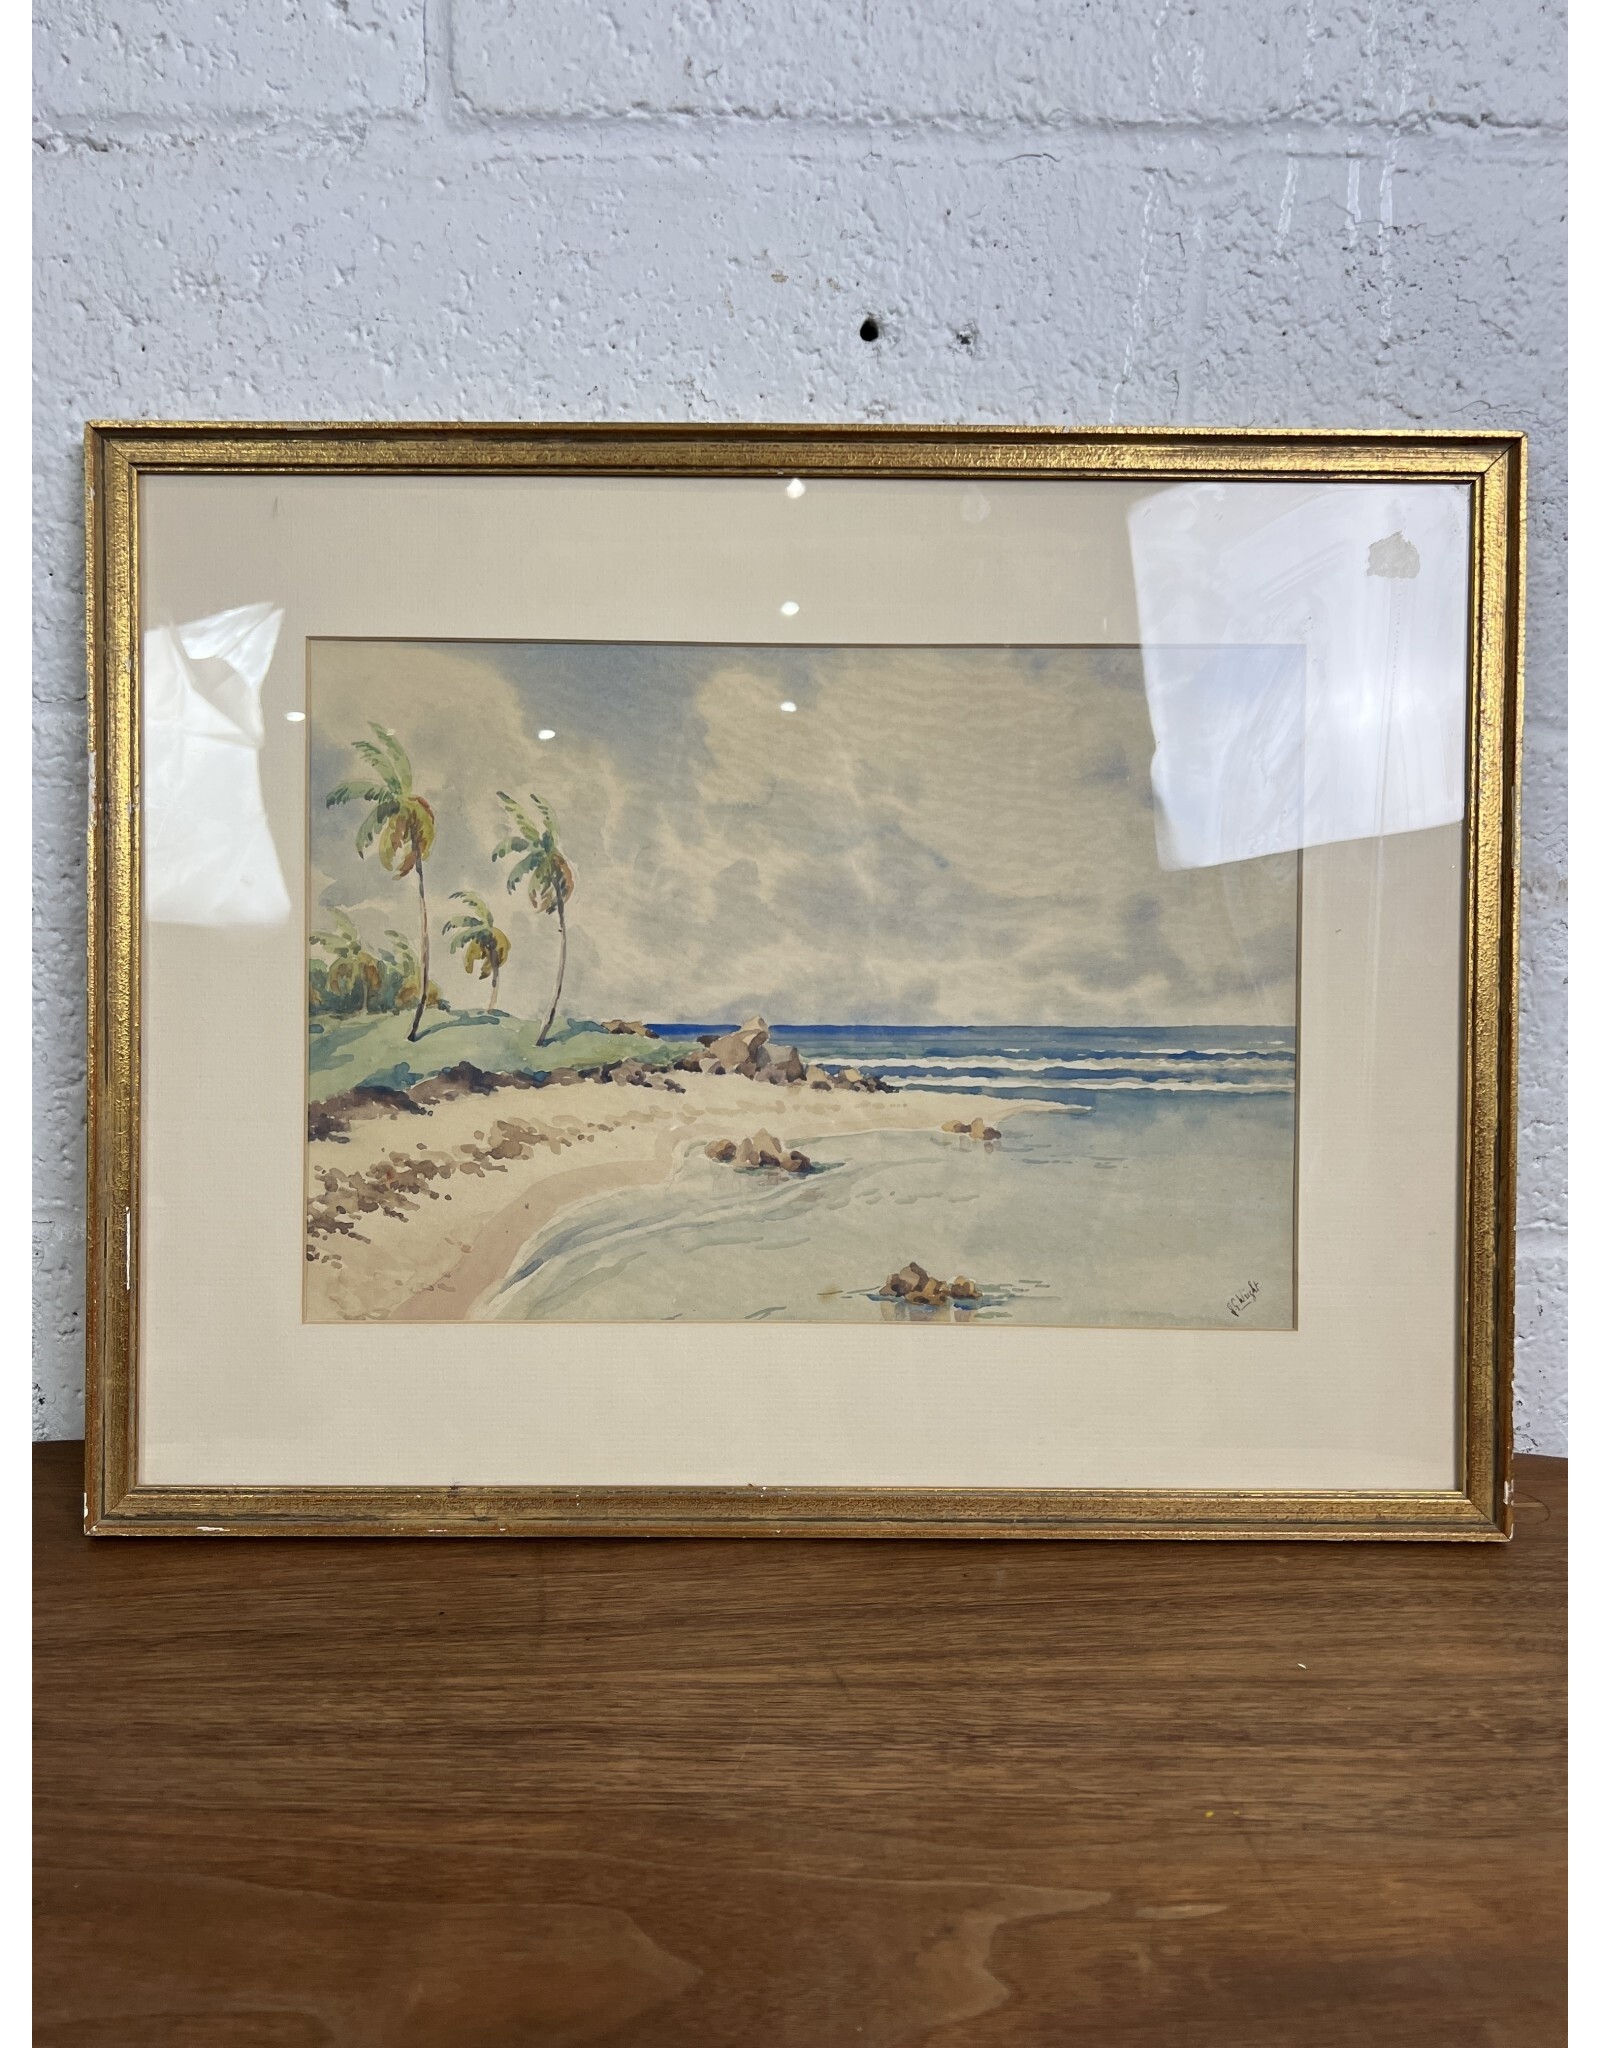 Coasting, framed watercolor painting, sgnd G. Wright